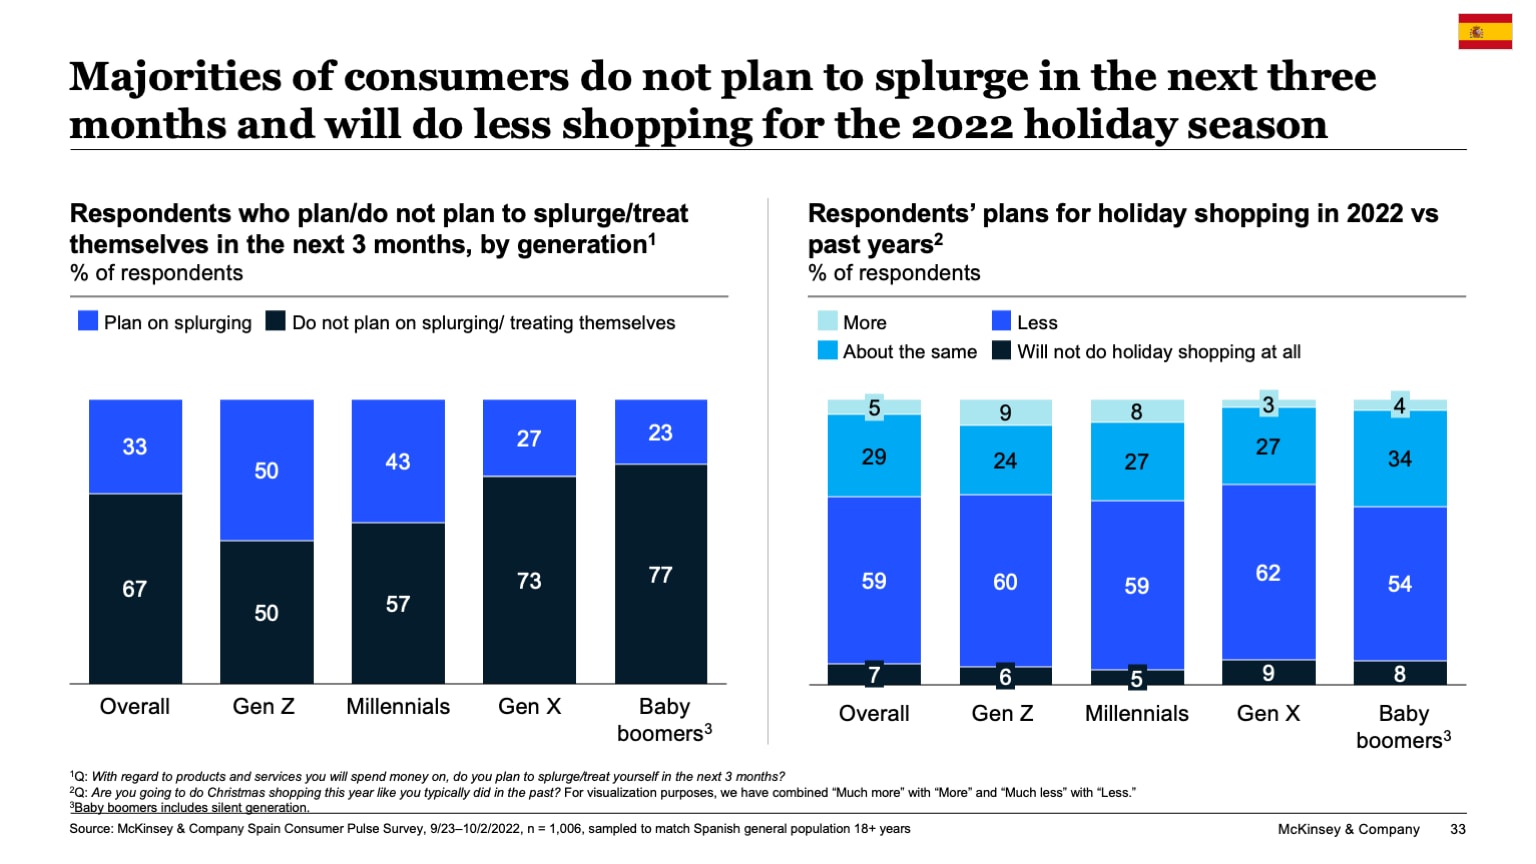 Majorities of consumers do not plan to splurge in the next three months and will do less shopping for the 2022 holiday season